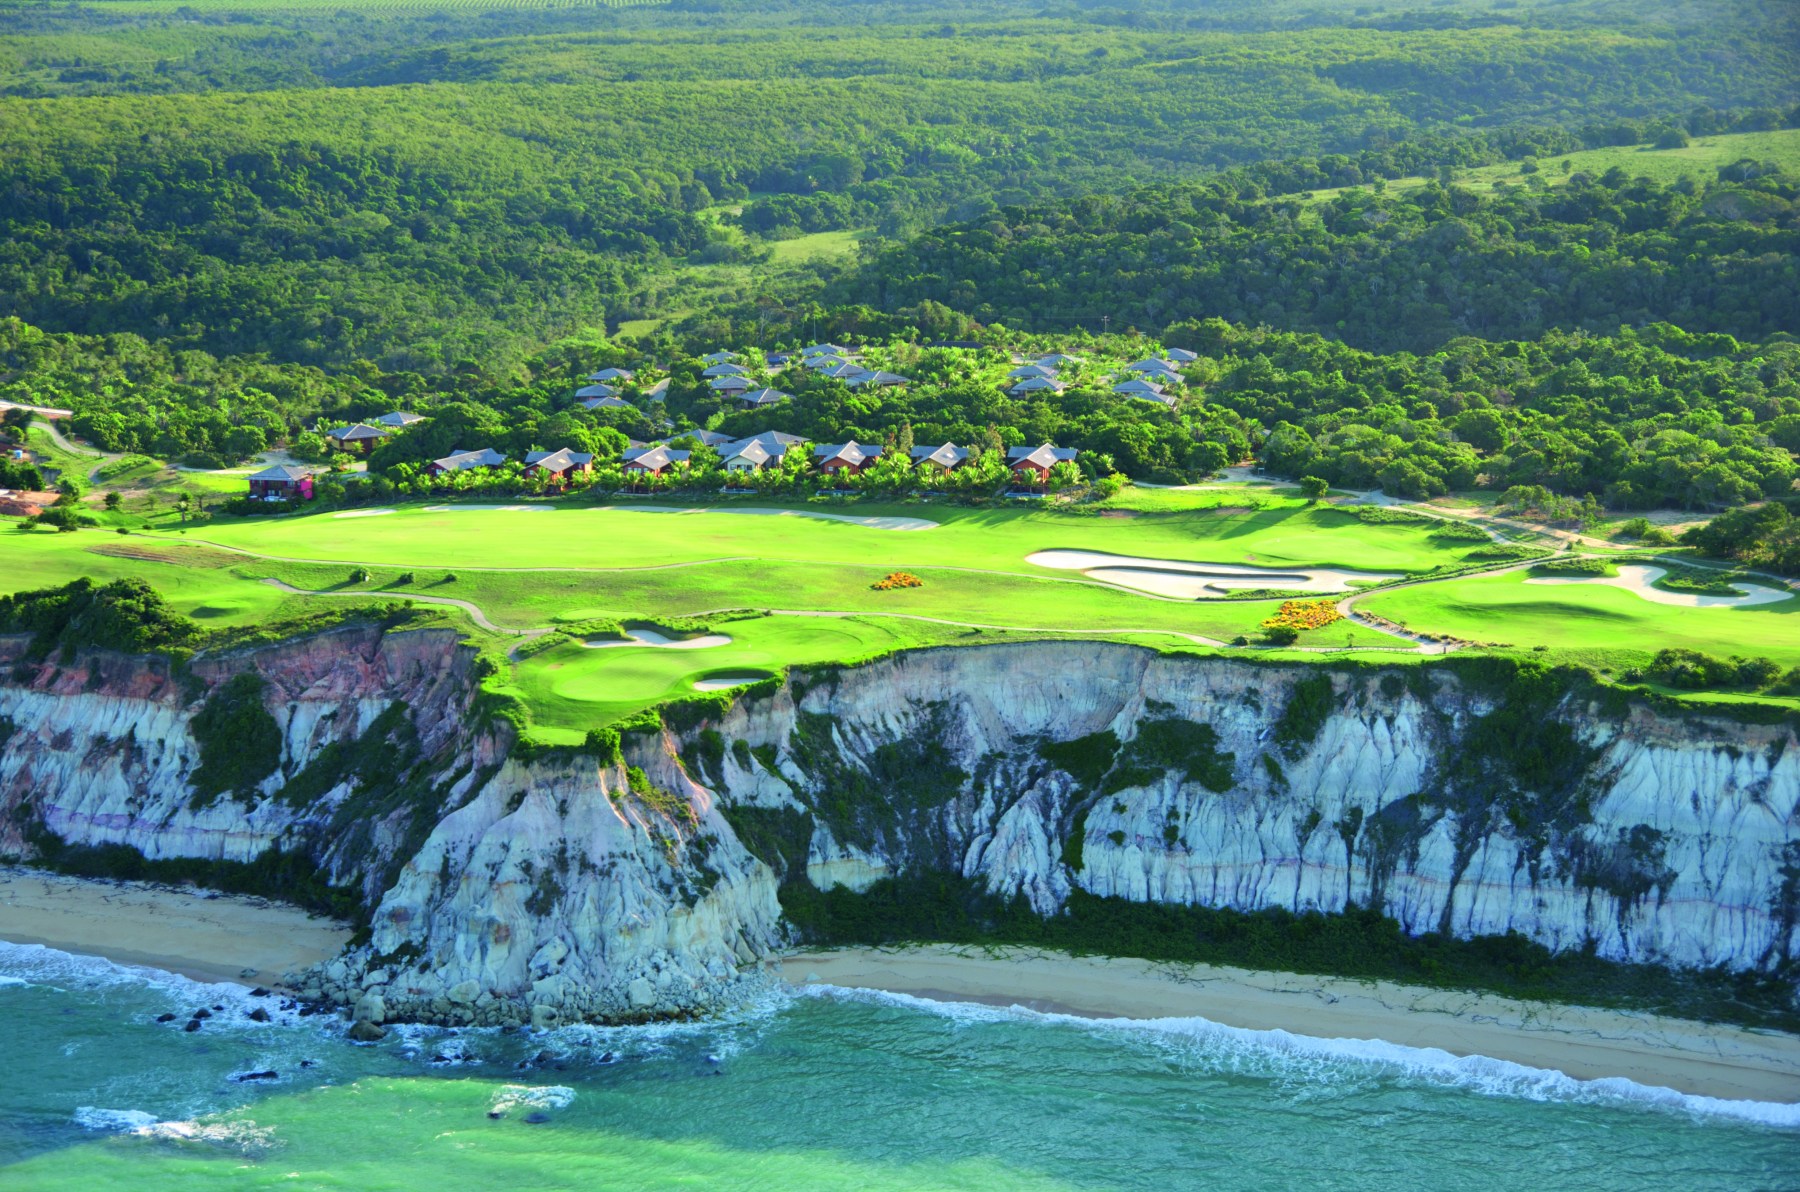 <strong>TERRAVISTA GOLF COURSE</strong>, Brazil. Golfers play through the rainforest before emerging atop oceanfront cliffs.<br> <br>Waldek says: "Terravista in jet-set chic Trancoso allows golfers to enjoy two of the country’s most scenic landscapes: The rainforest and the beach. Four holes abut 150-foot-tall cliffs overlooking the Atlantic; the particularly picturesque hole 14 is the standout as it’s set on a section of the cliffs that juts out over the beaches below."<br>